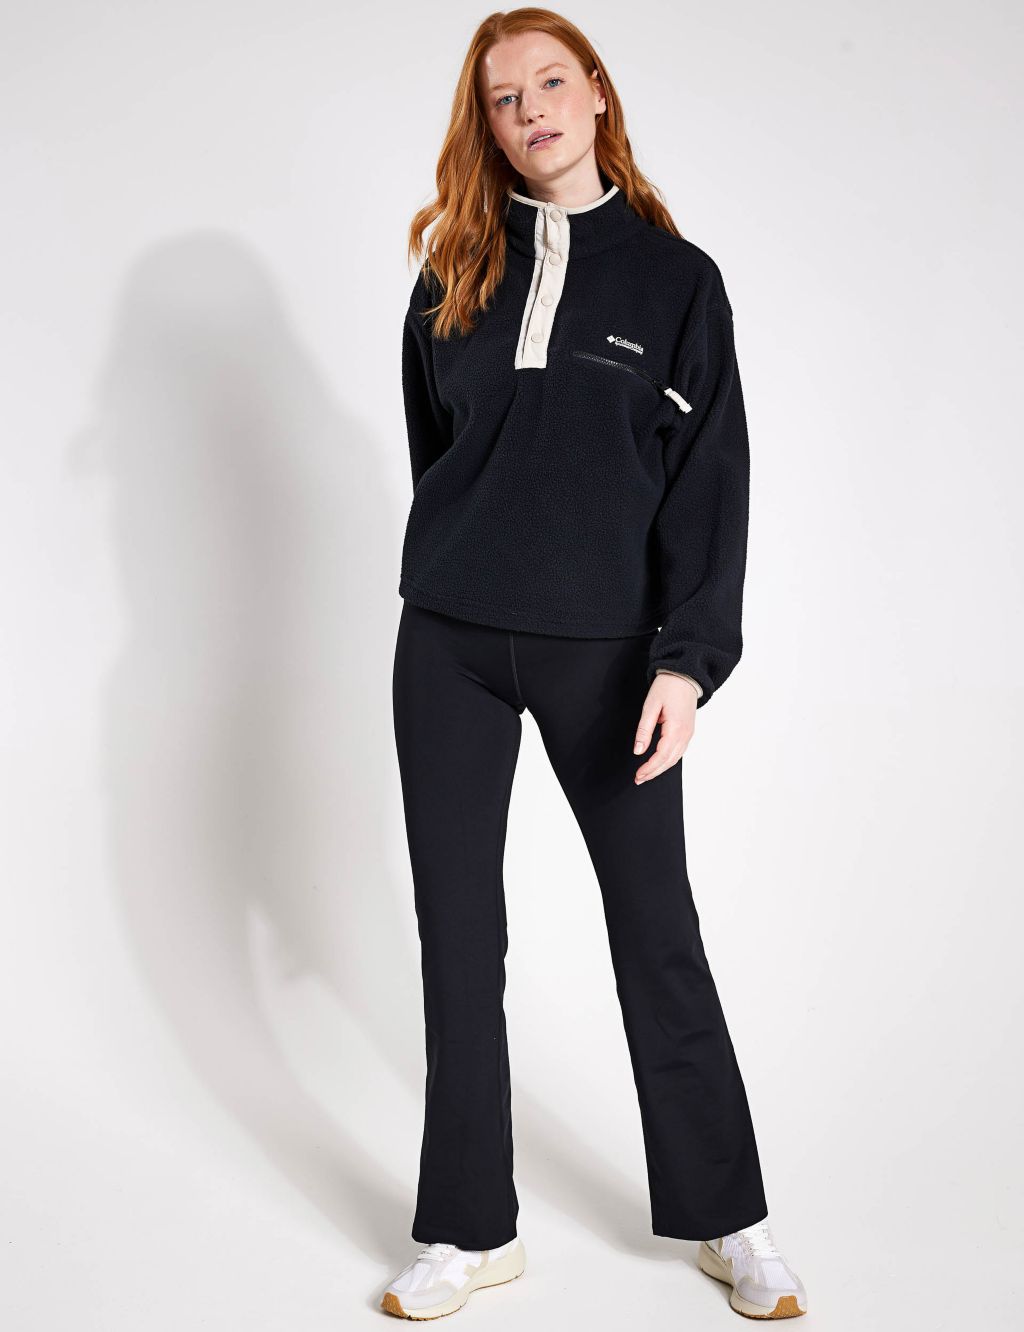 Helvetia Funnel Neck Cropped Jacket image 2